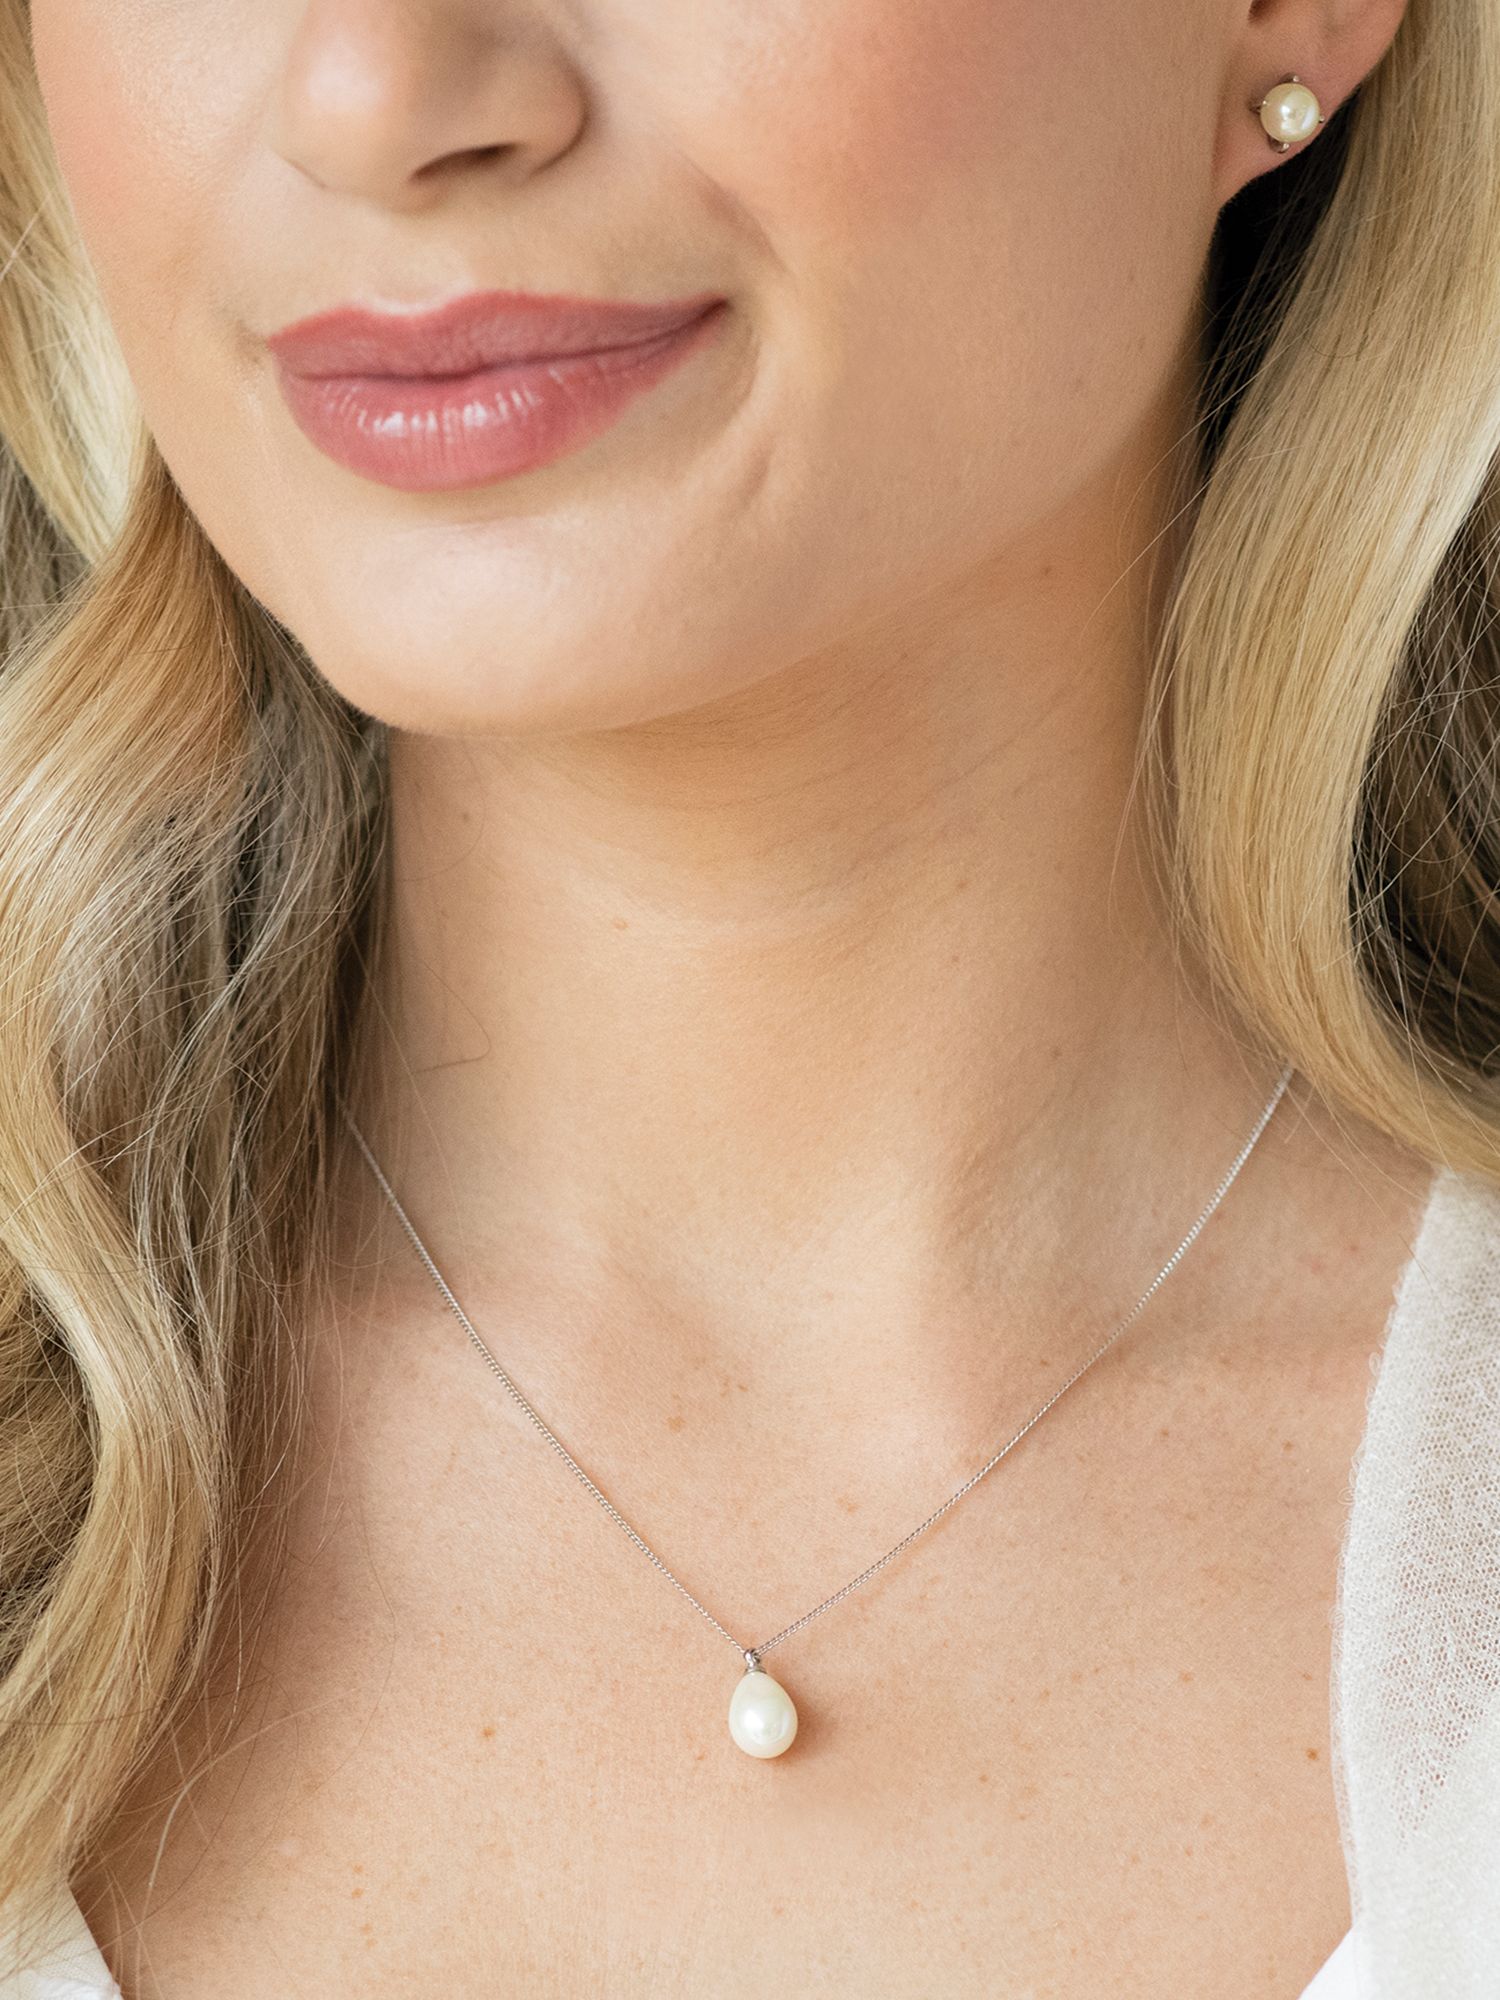 Ivory & Co. Westbury Faux Pearl Pendant Necklace, Silver